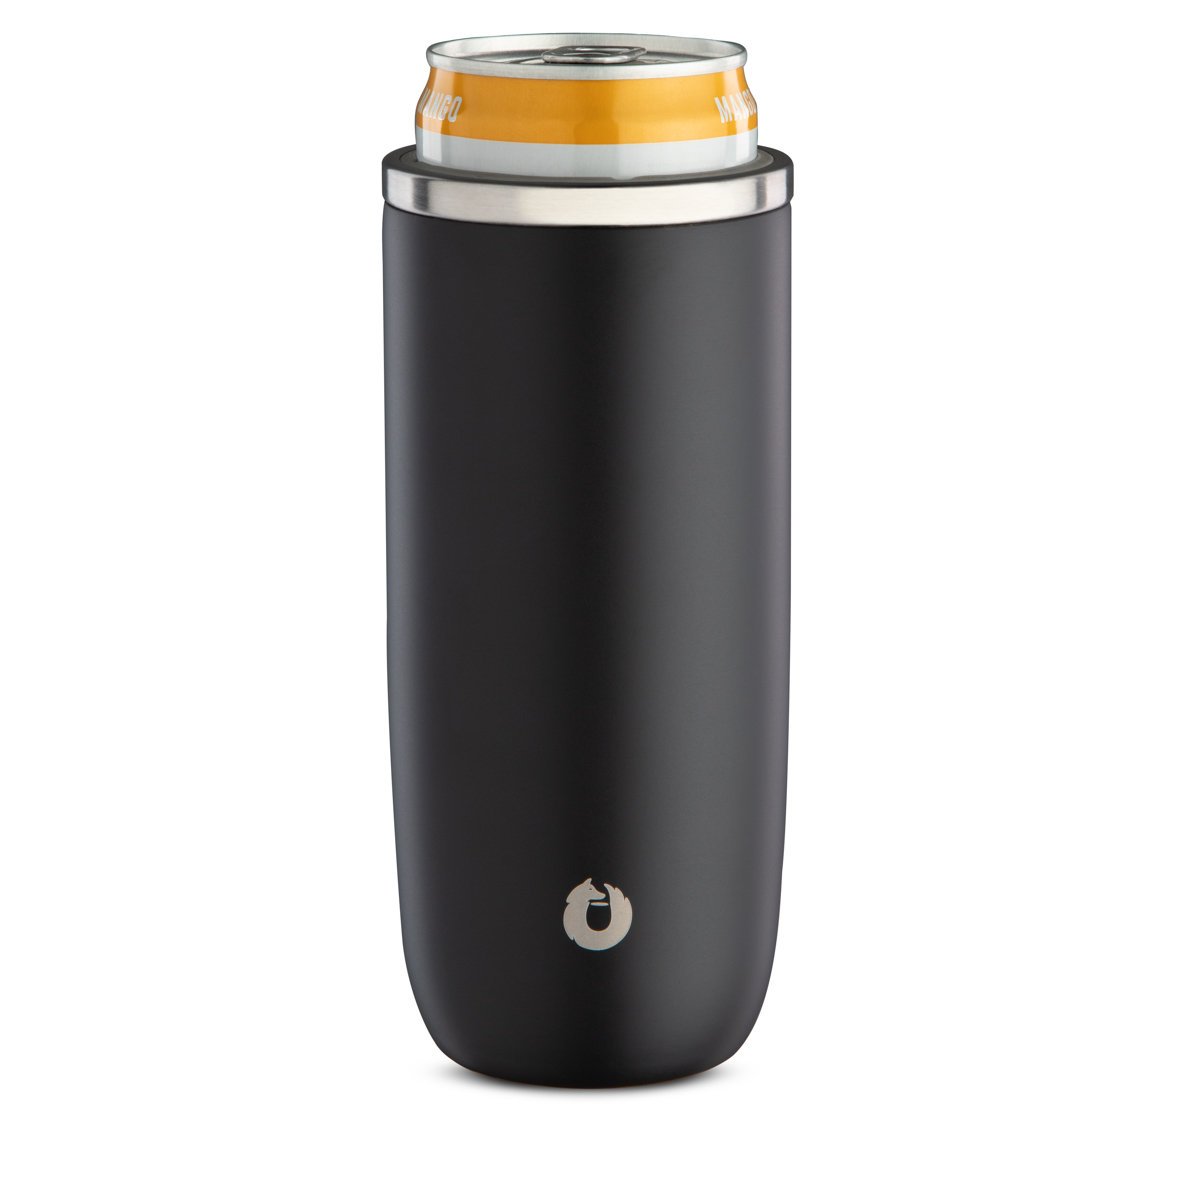 12oz Insulated Slim Can Cooler by Snowfox